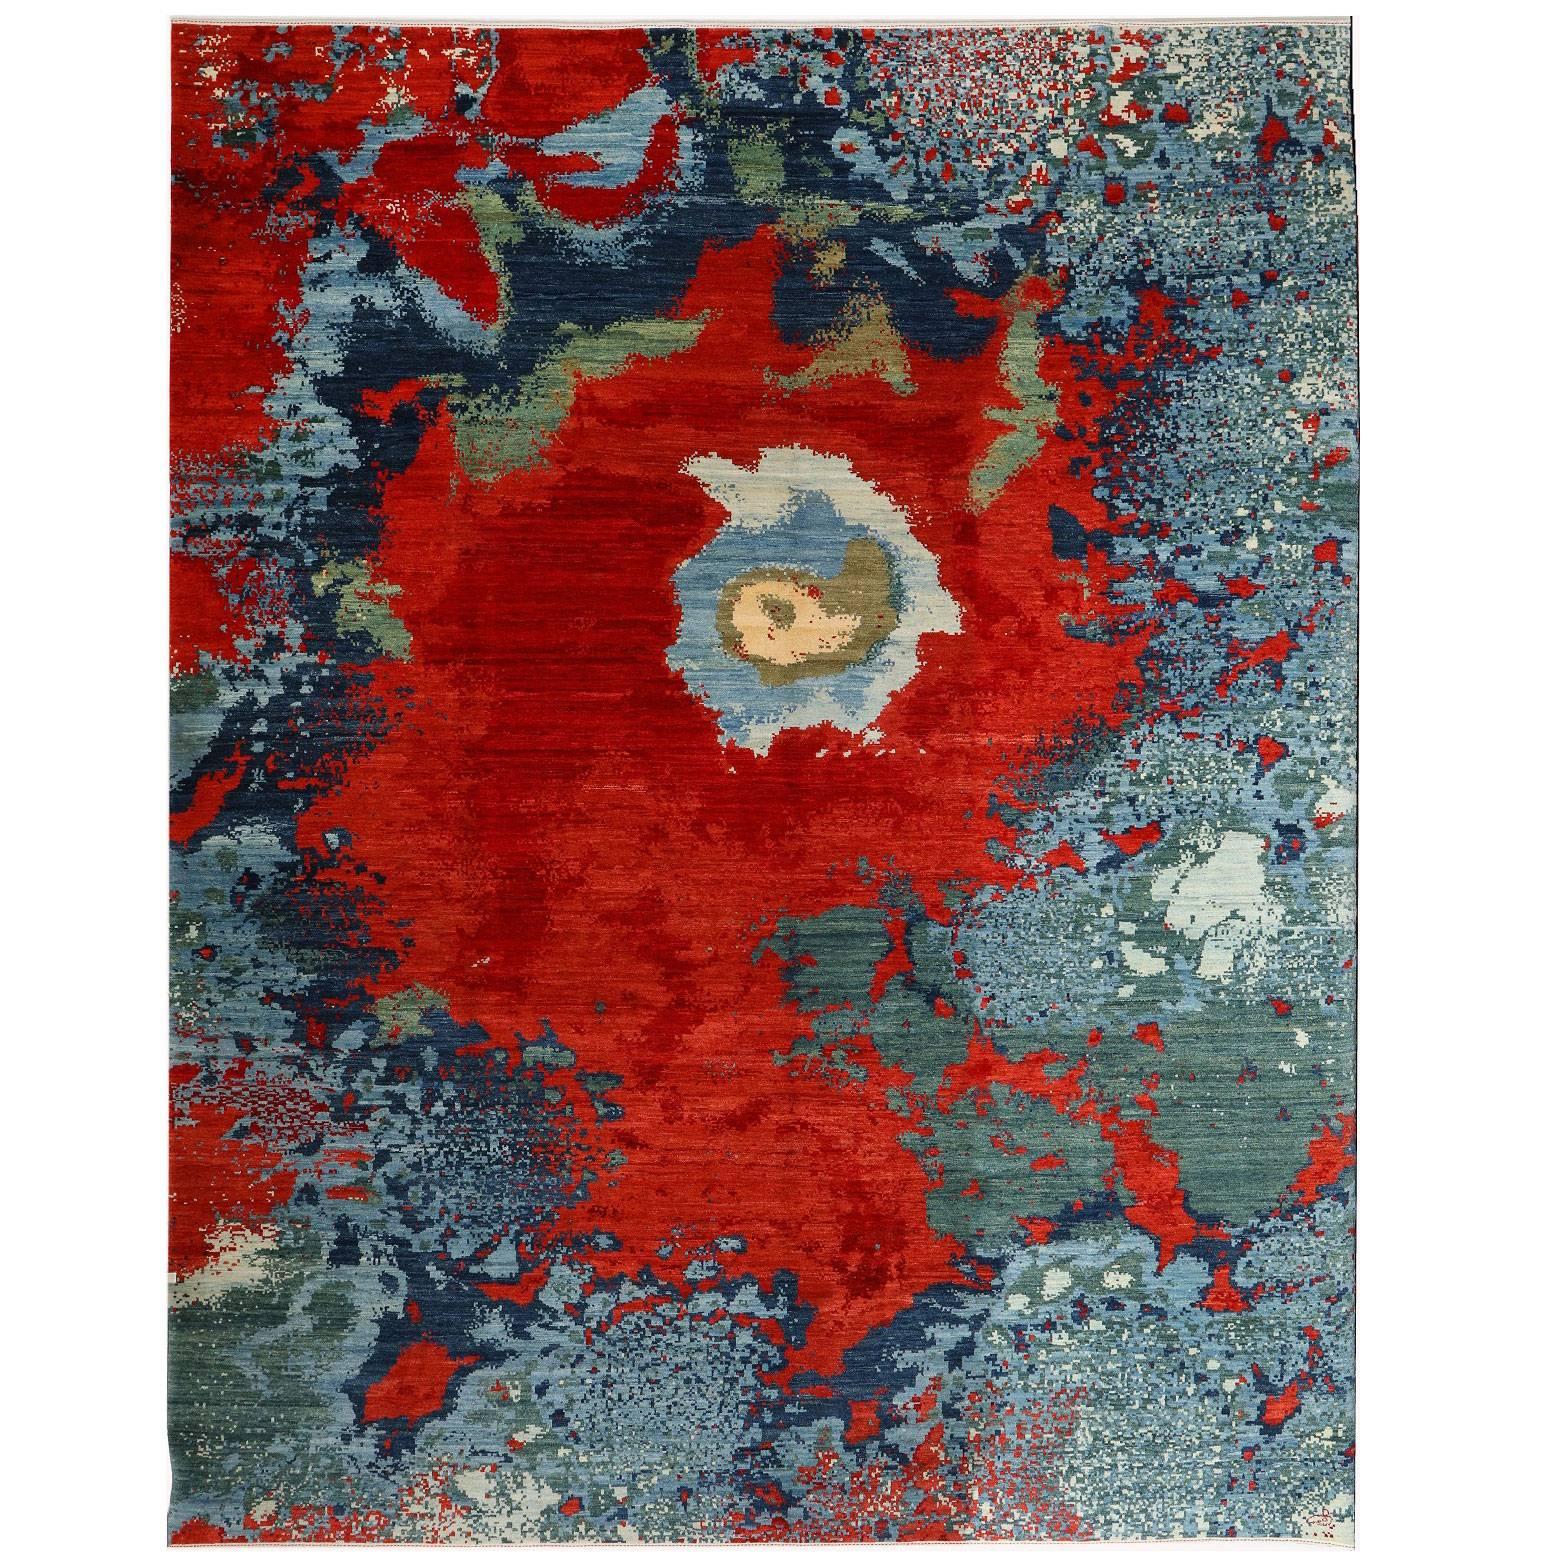 Orley Shabahang "Magma" Contemporary Persian Rug, 9' x 12' For Sale